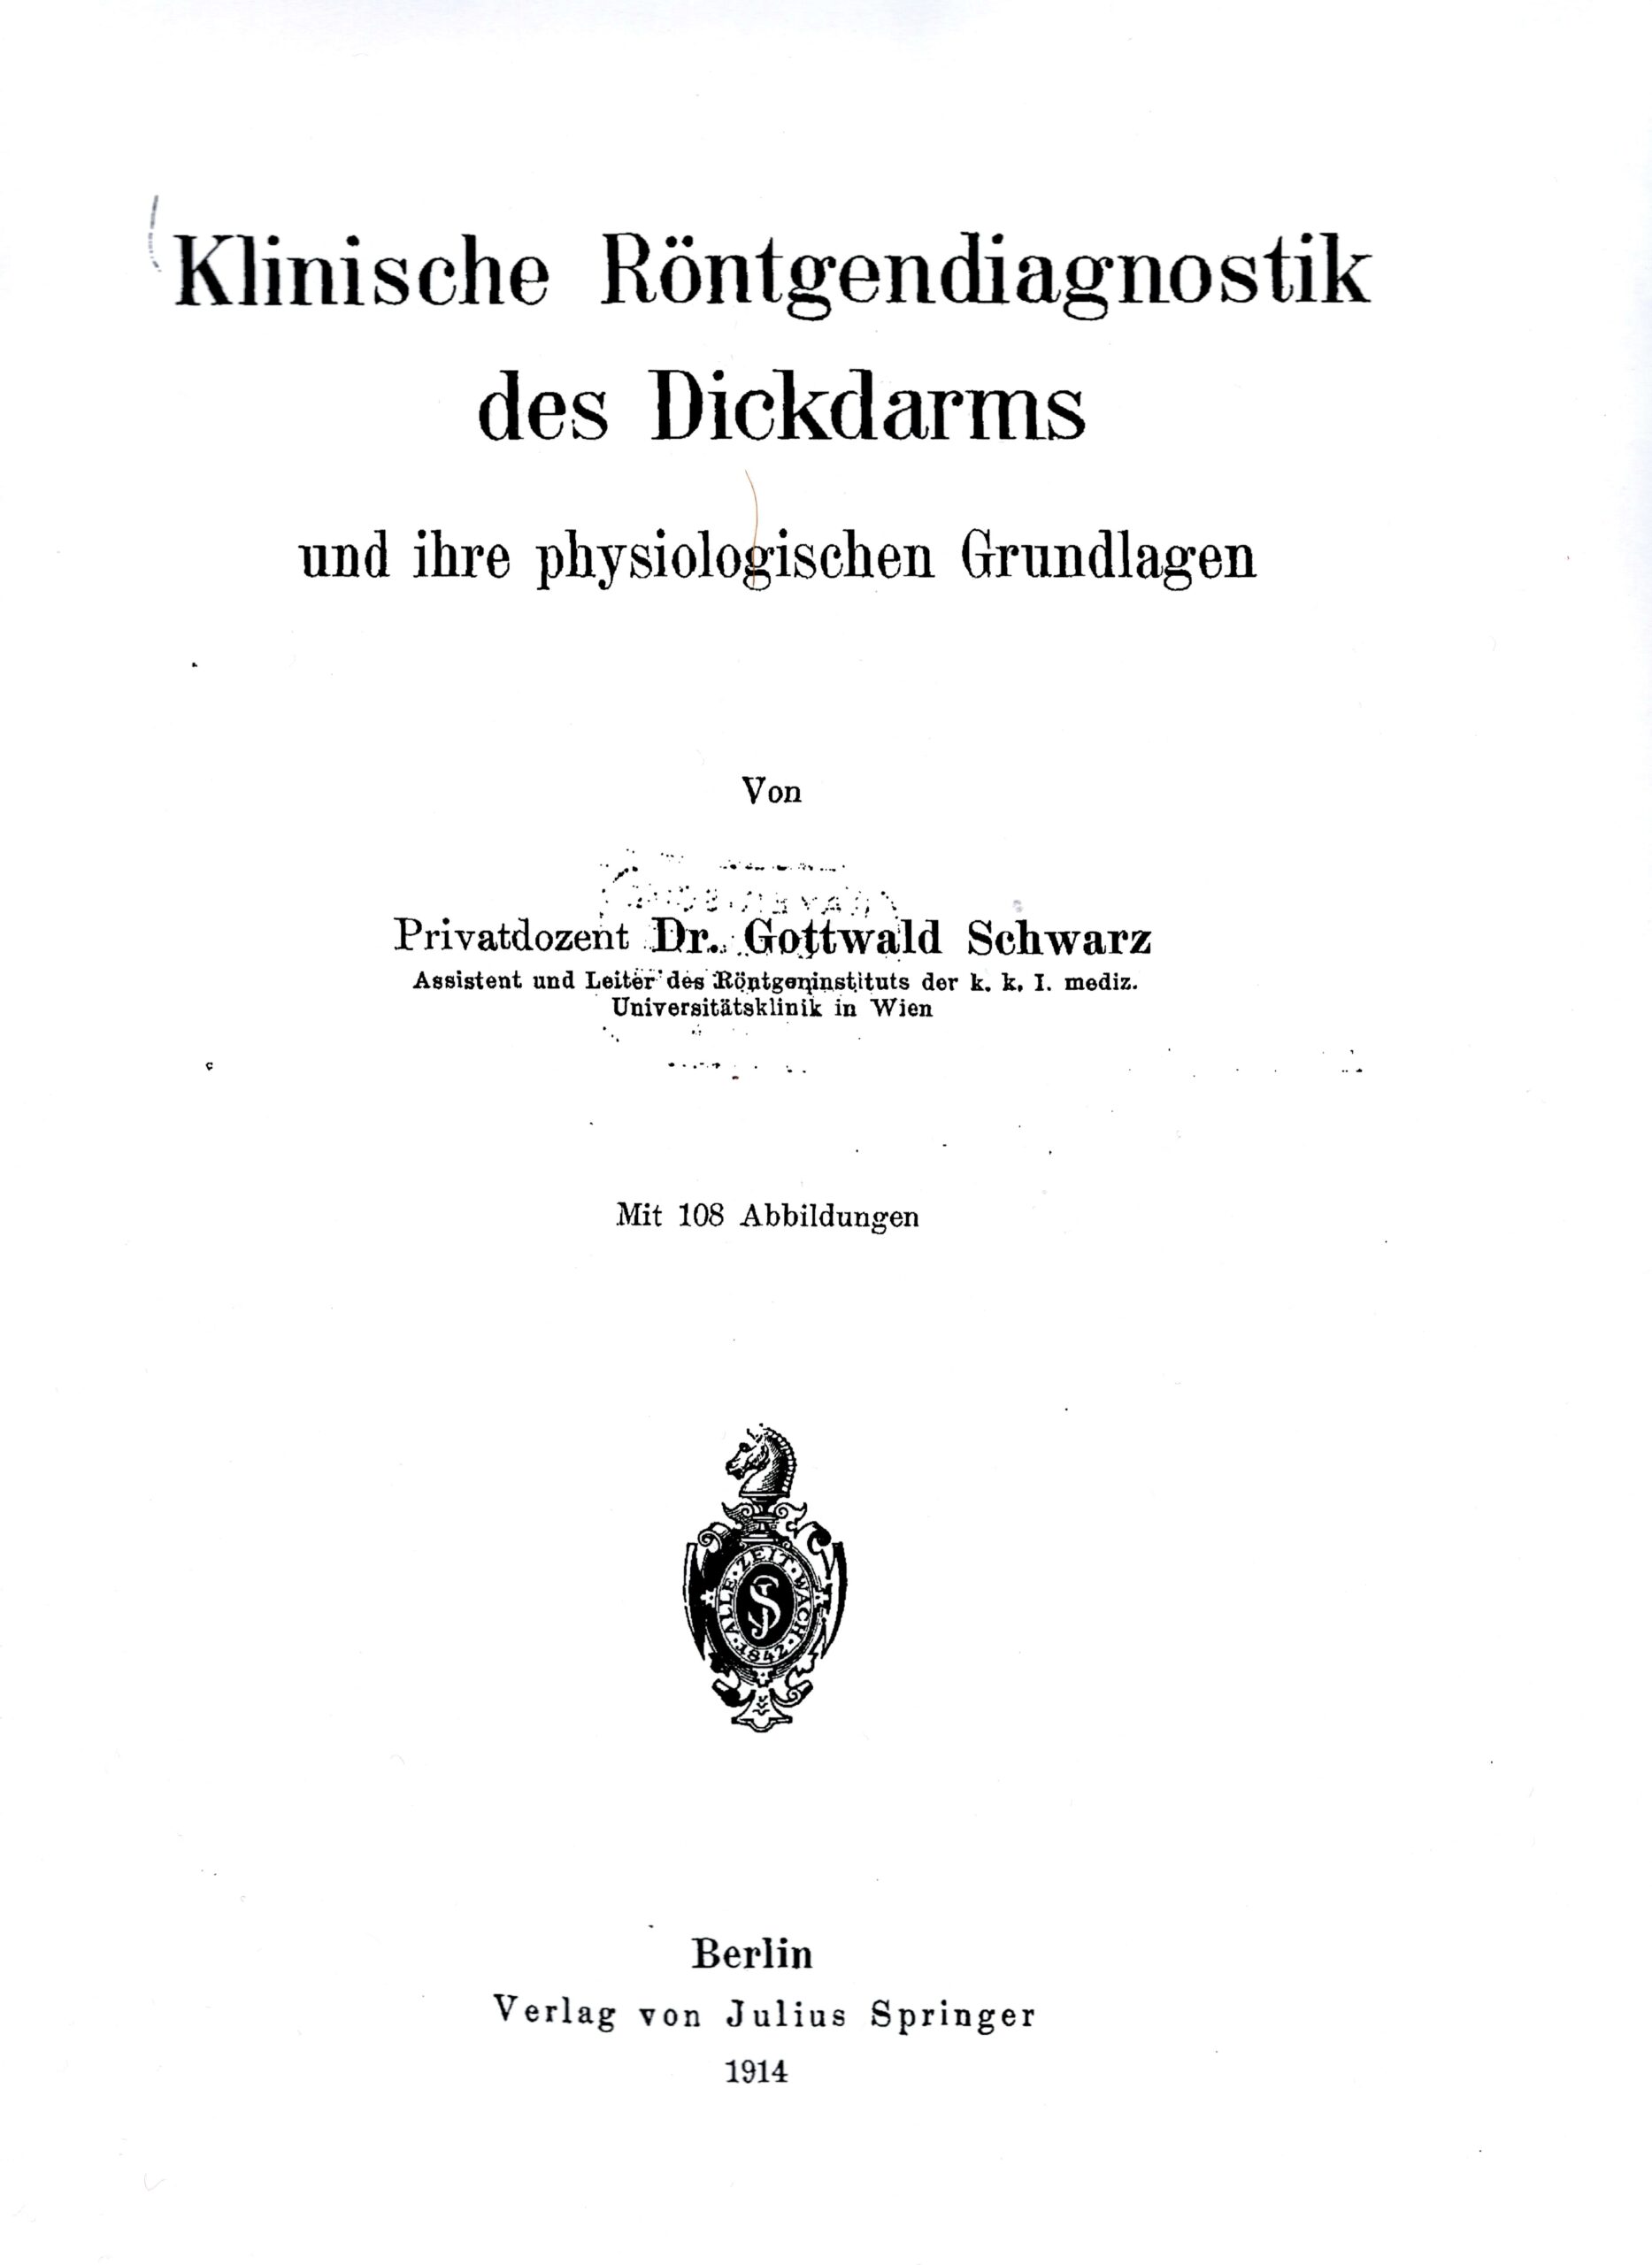 Schwarz' pioneering early textbook on x-ray diagnostics of the gastrointestinal tract